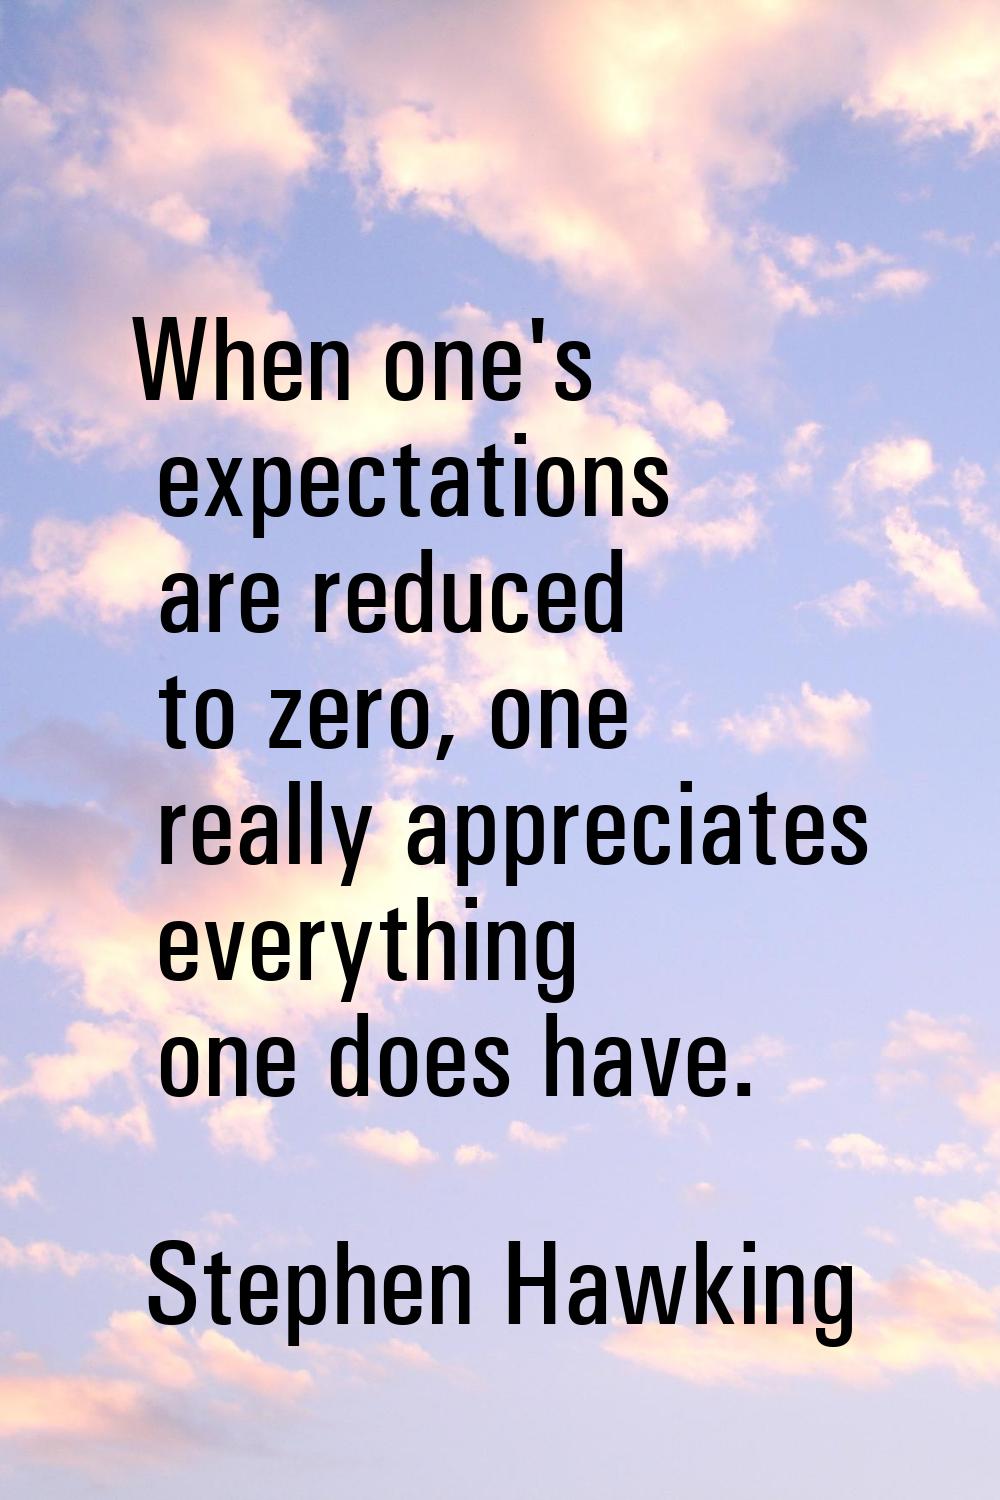 When one's expectations are reduced to zero, one really appreciates everything one does have.